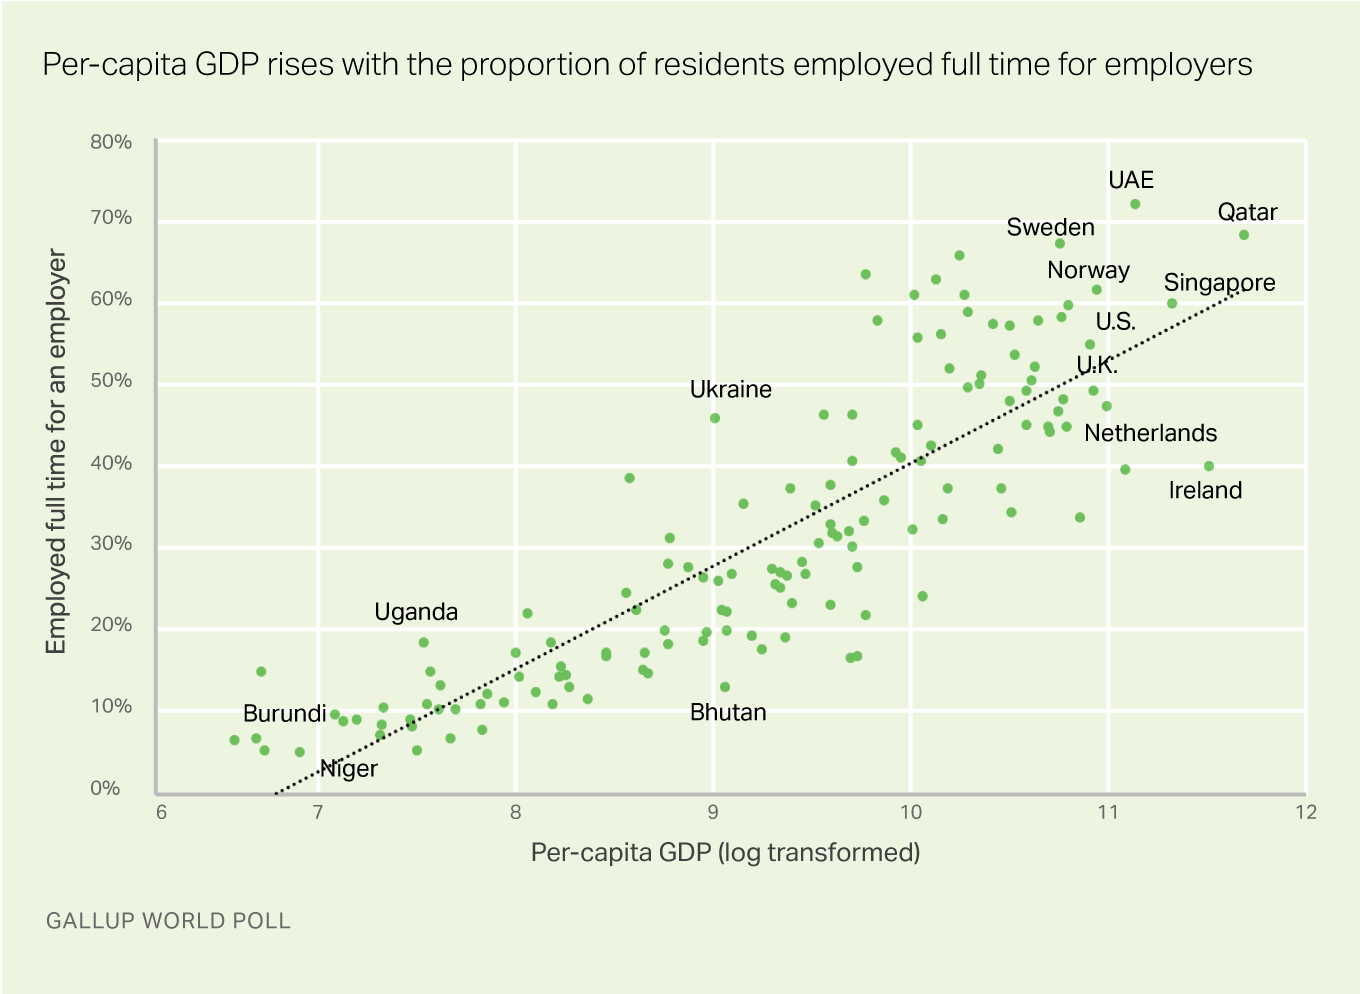 Per-capita GDP rises with the proportion of residents employed full time for employers